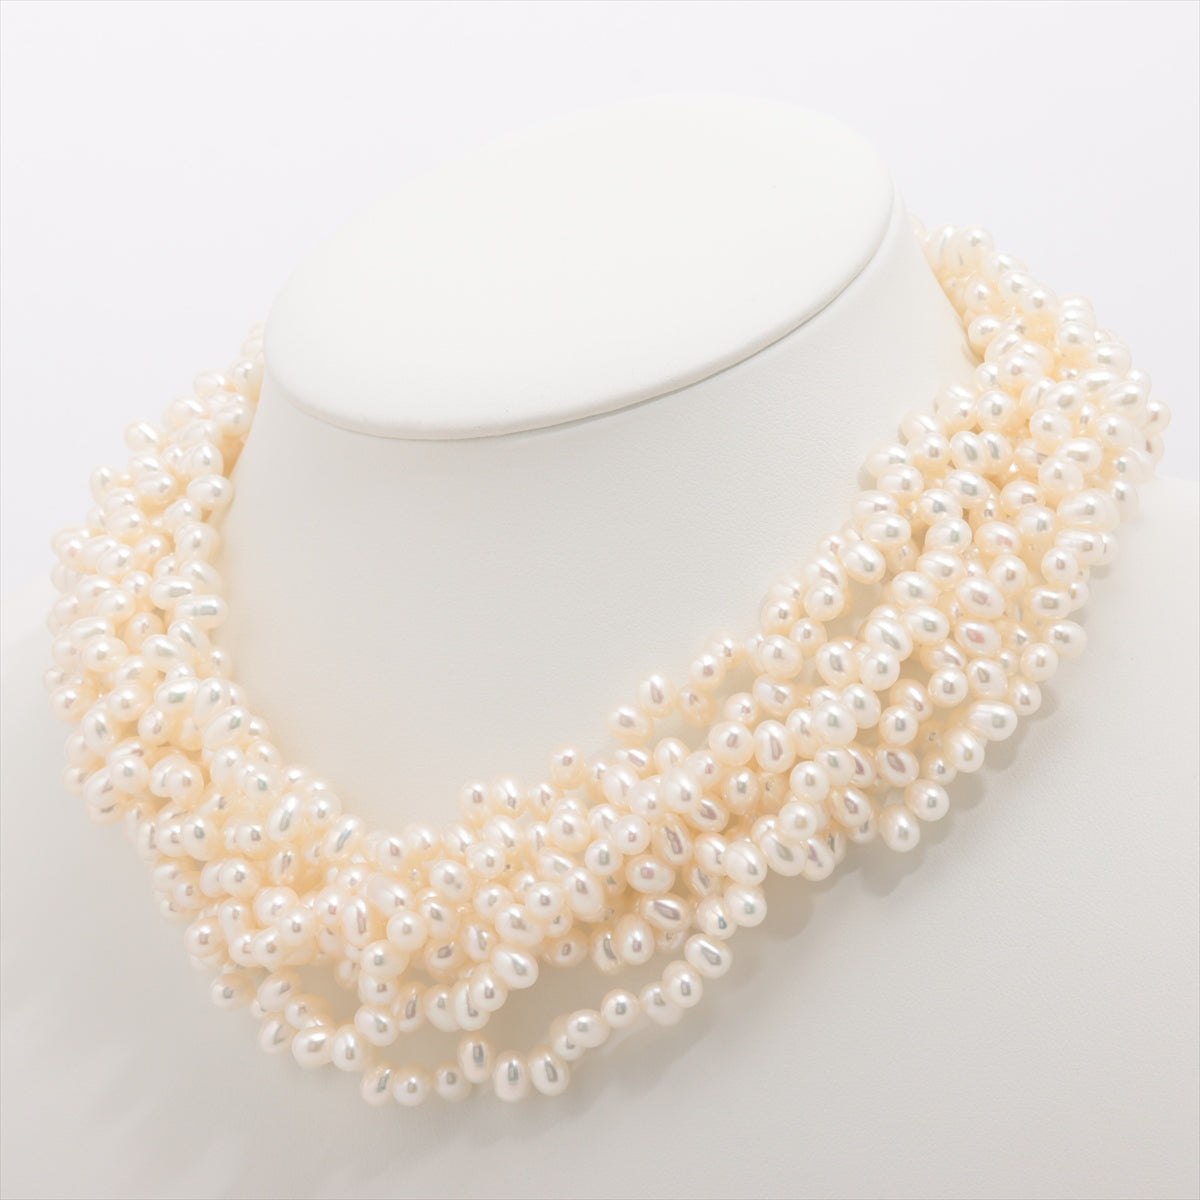 Tiffany Torsade Choker 925 x pearl Total weight: 174g White Paloma Picasso 8 rows Necklace